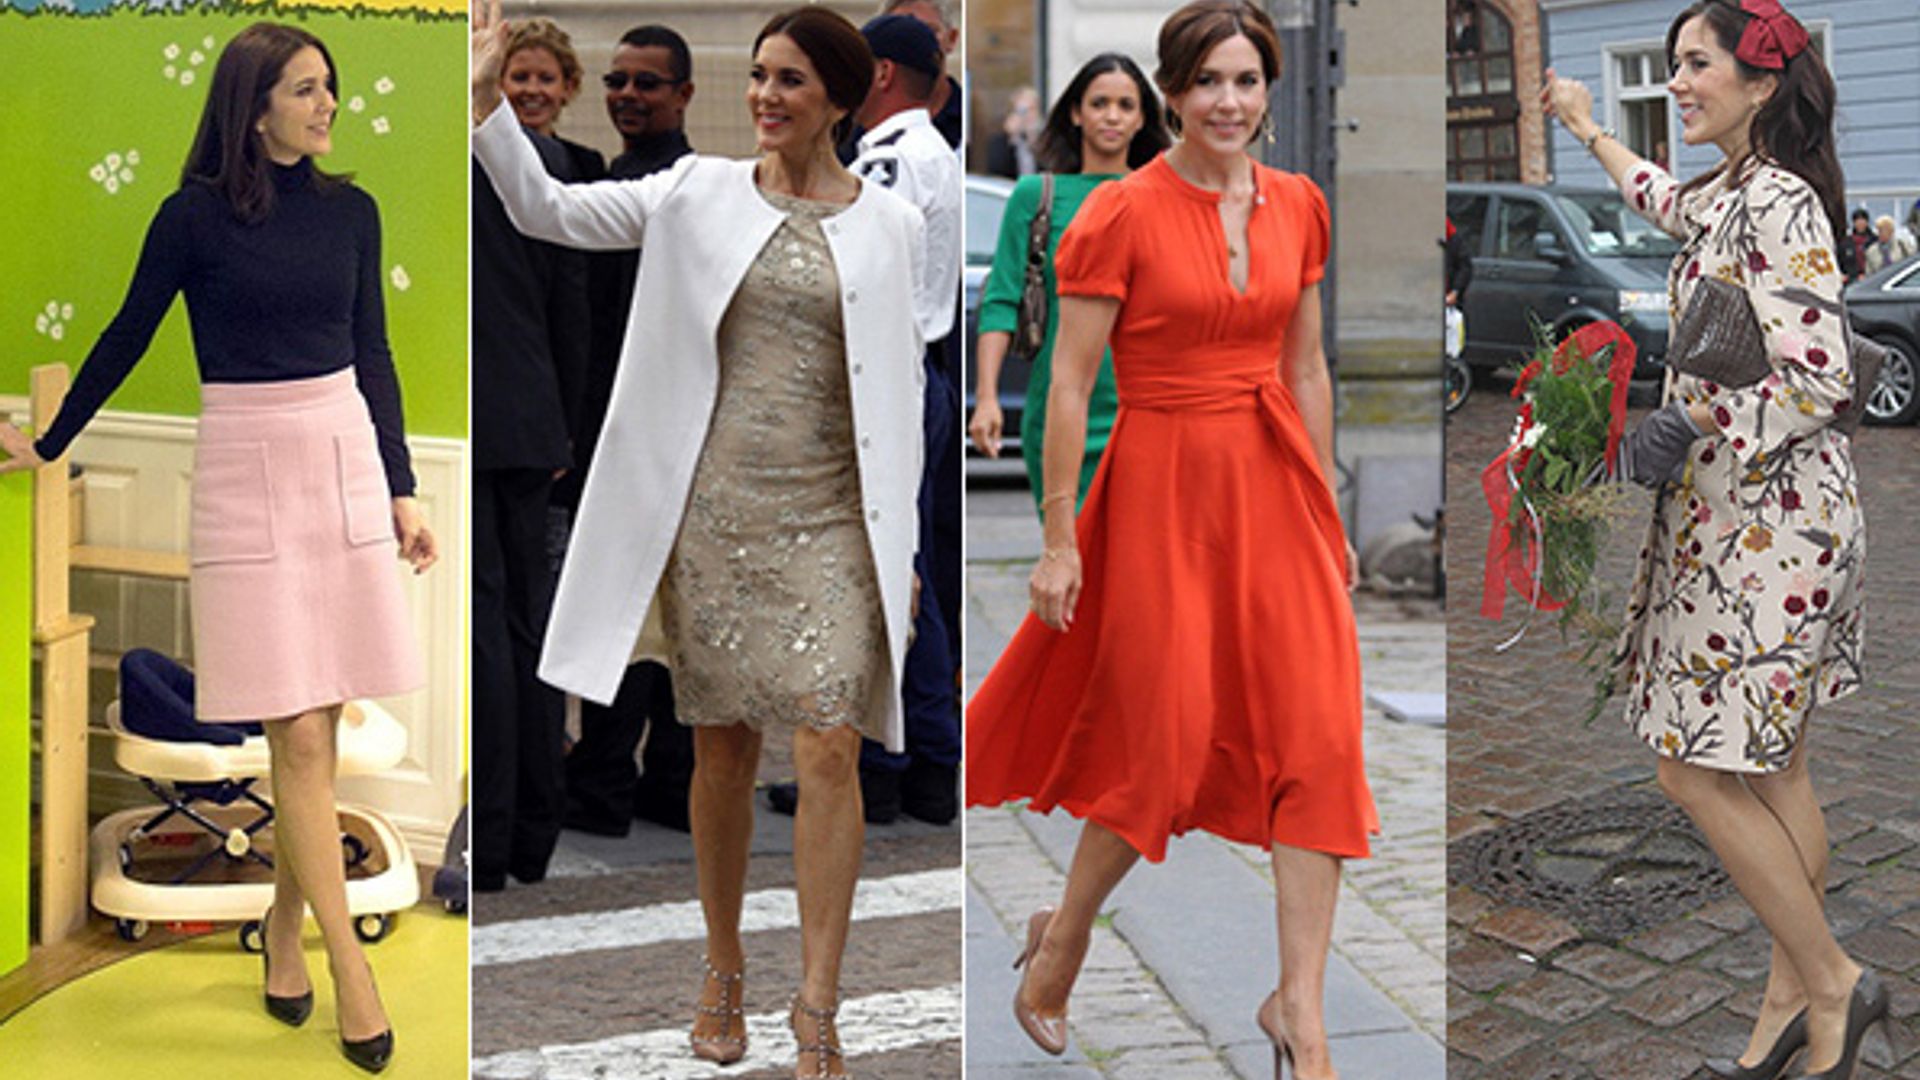 As Crown Princess Mary of Denmark turns 45, we look back on her most stylish moments